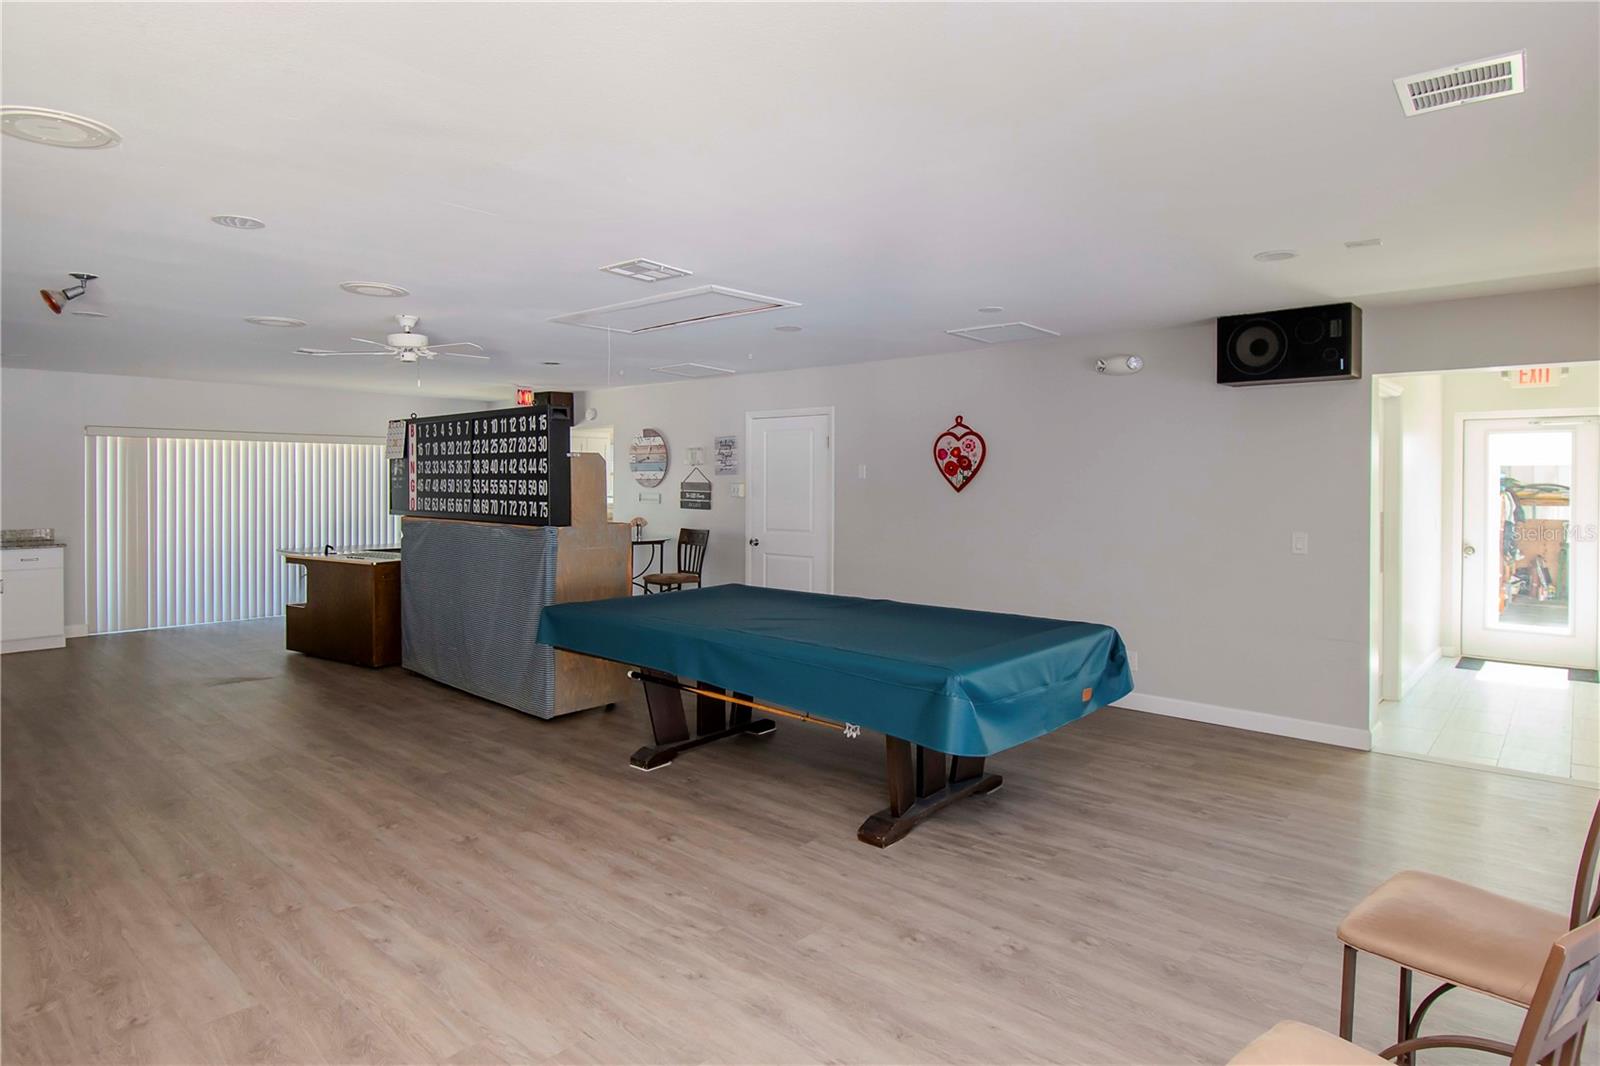 Bingo and Pool table in Club House